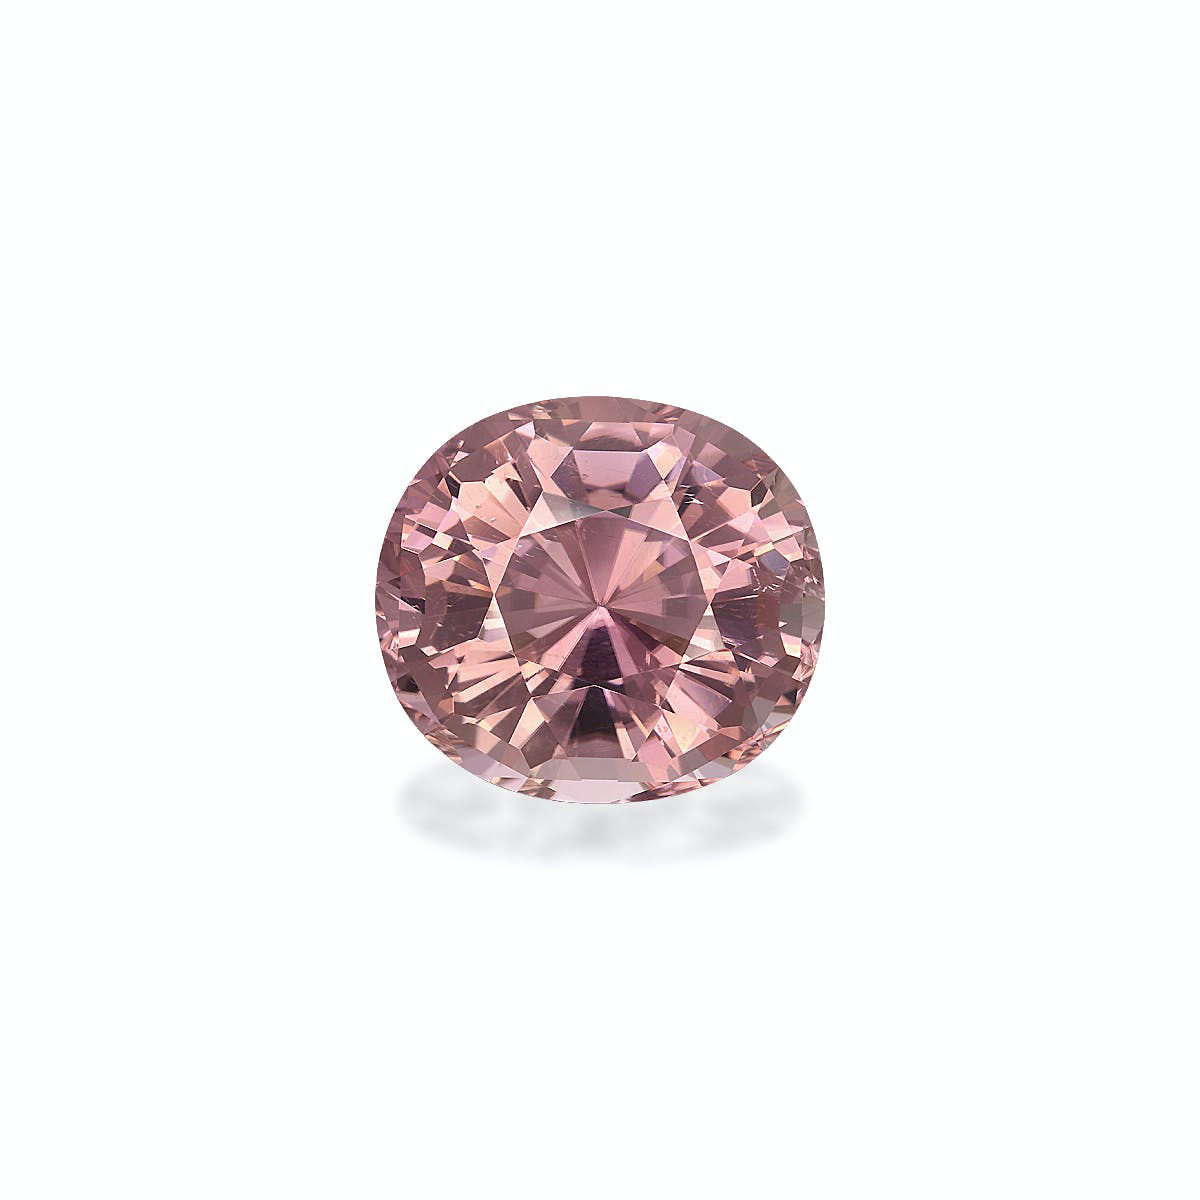 Picture of Salmon Pink Tourmaline 21.87ct - 19x17mm (PT0196)